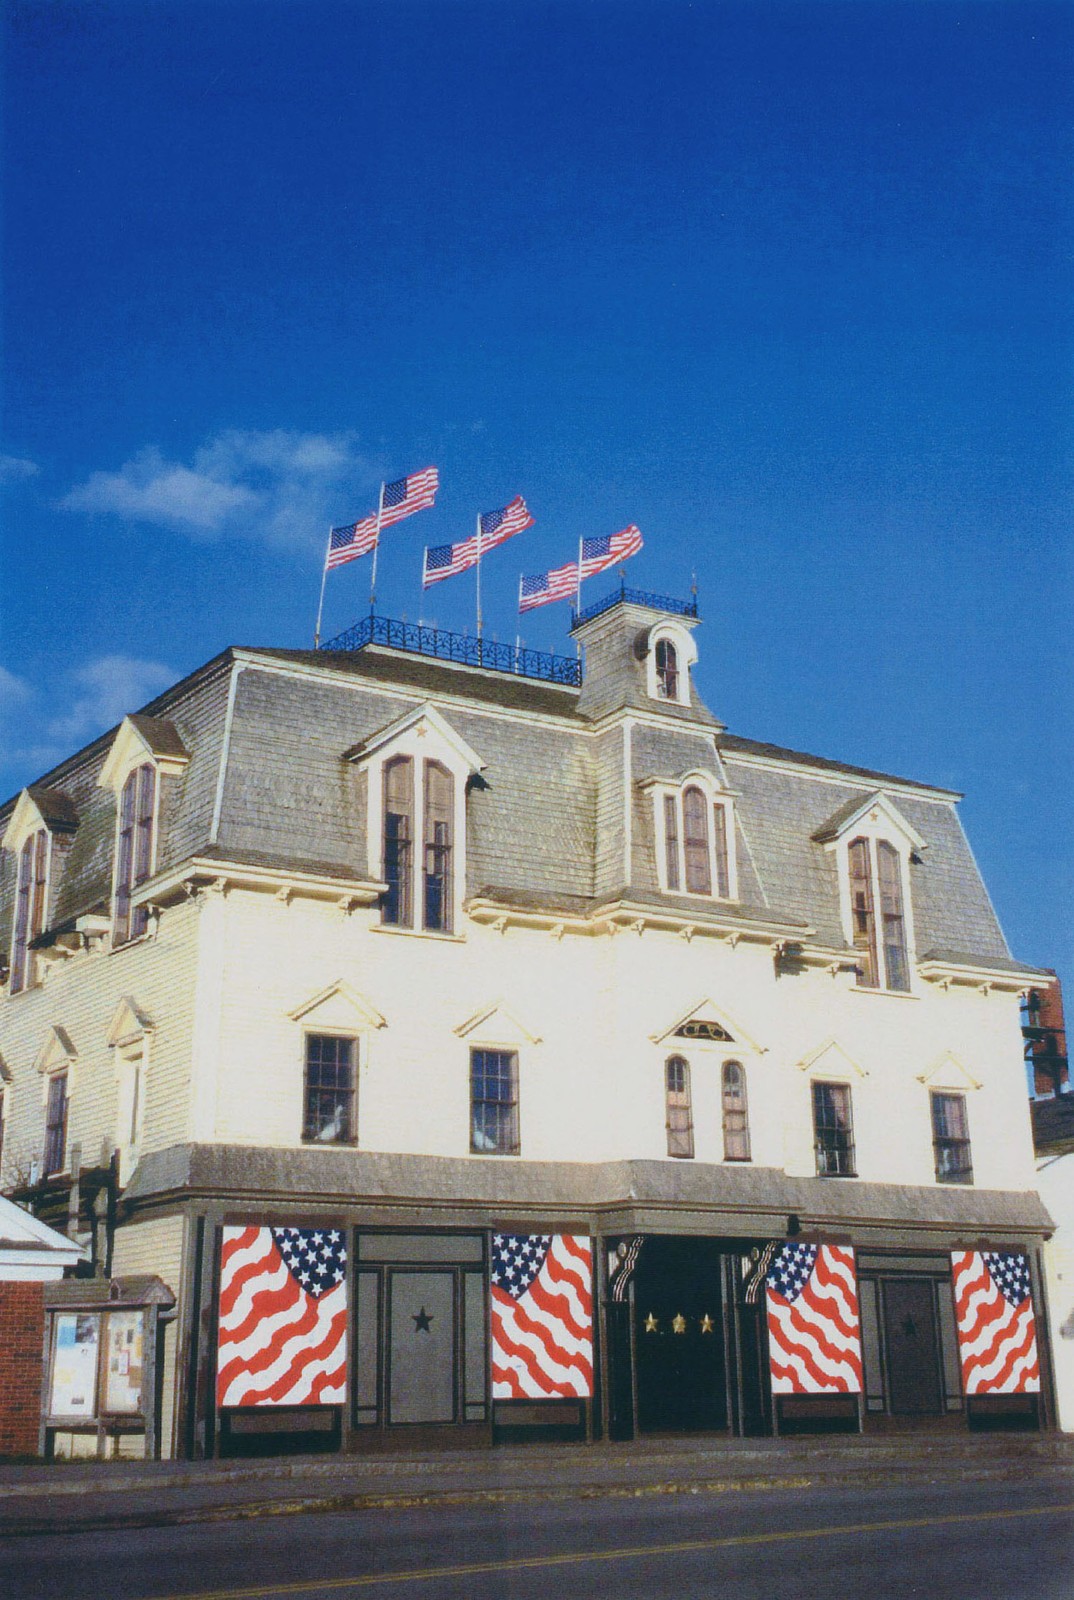 The Star of Hope in 2002, showing the American flags that Indiana painted on the boarded-up ground-floor windows and the flags he installed along the rooftop after September 11, 2001. Image courtesy of Dennis and Diana Griggs